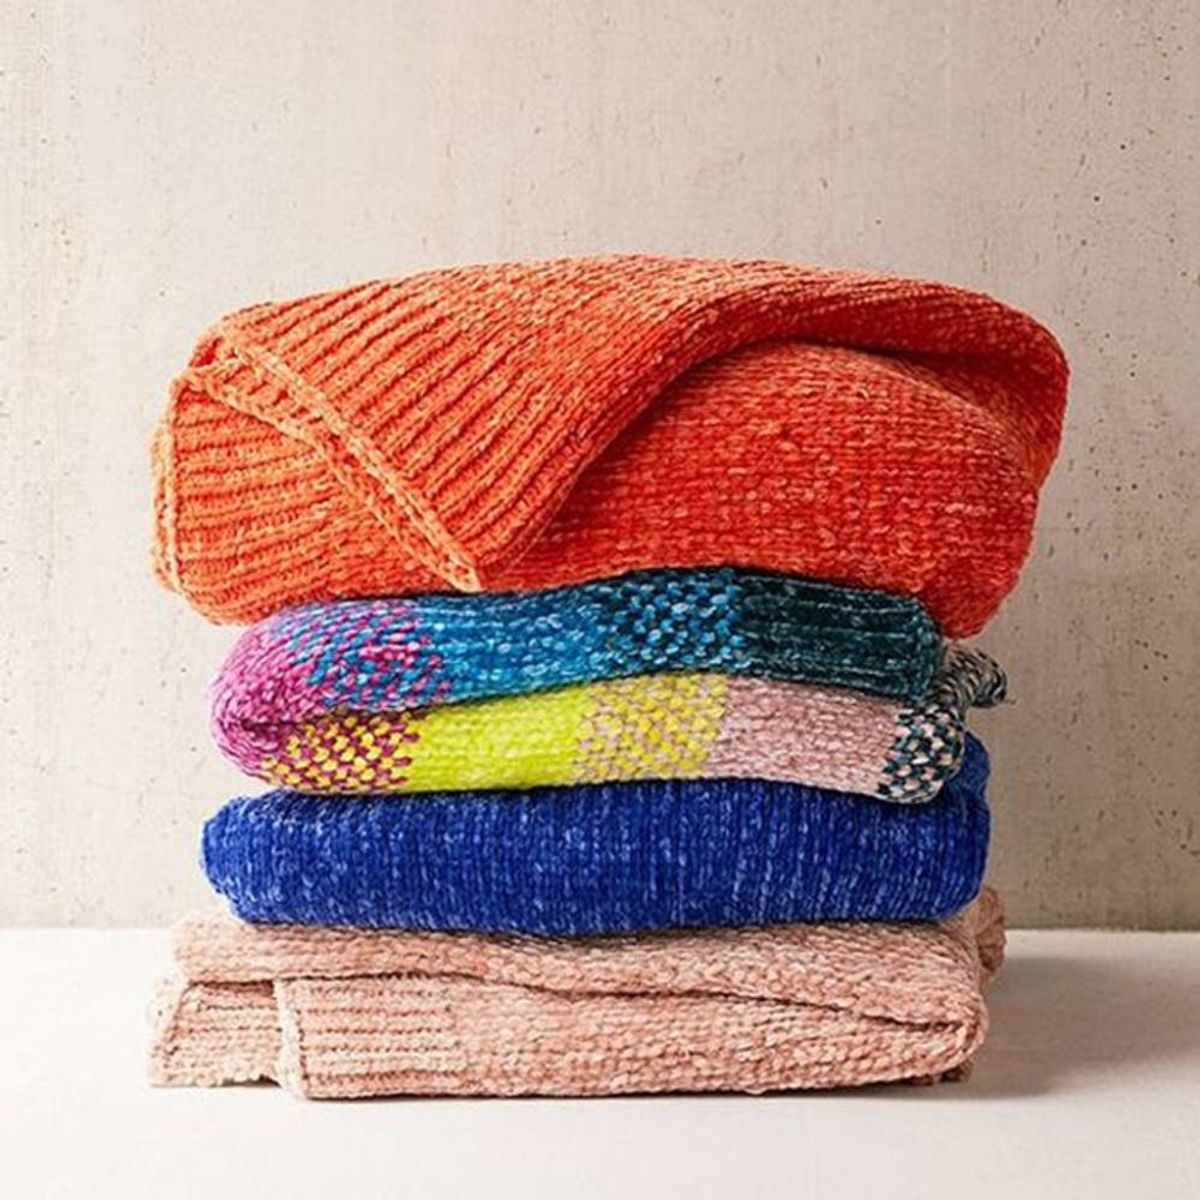 12 Cozy Throws to Help You Survive This Frigid Winter in Style